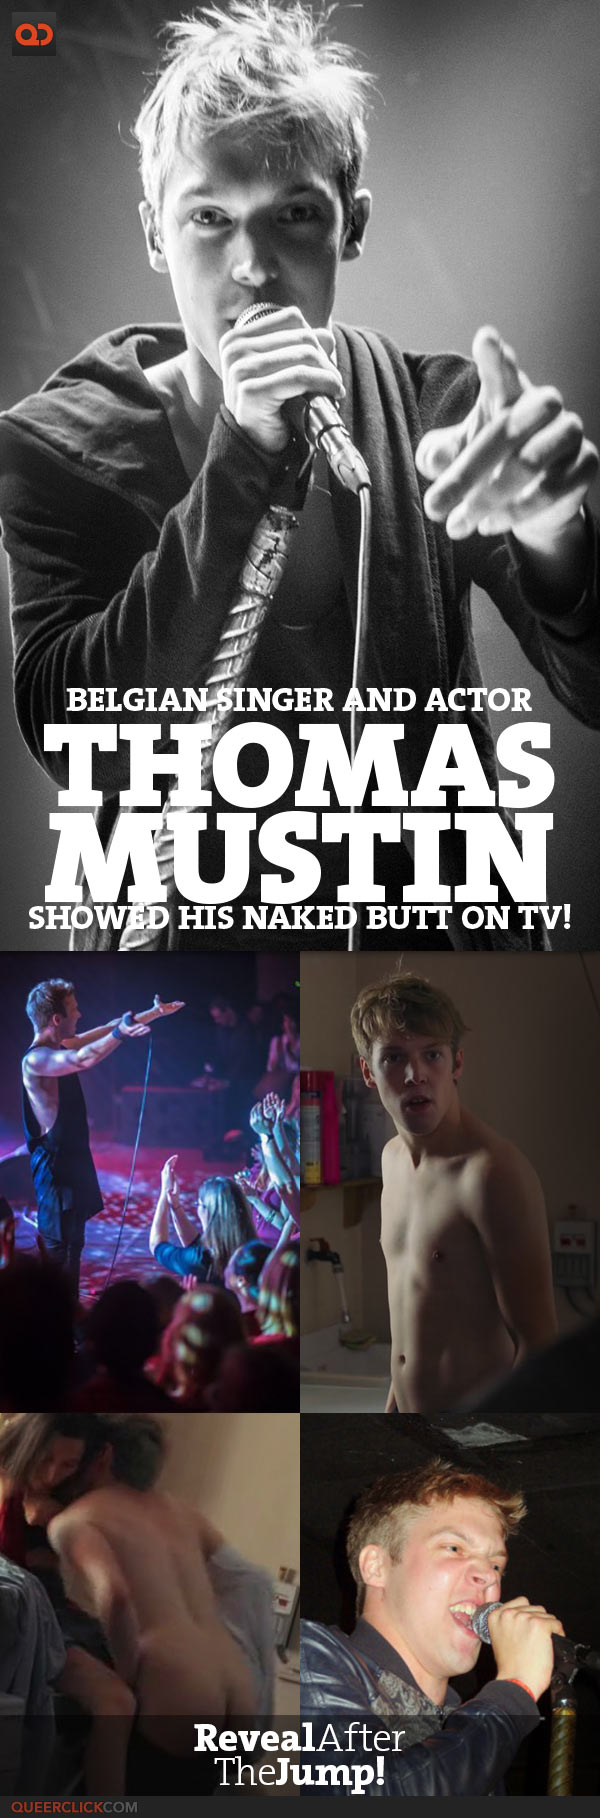 qc-exposed-celebs-thomas_mustin_belgian_singer_and_actor_naked_on_tv-teaser